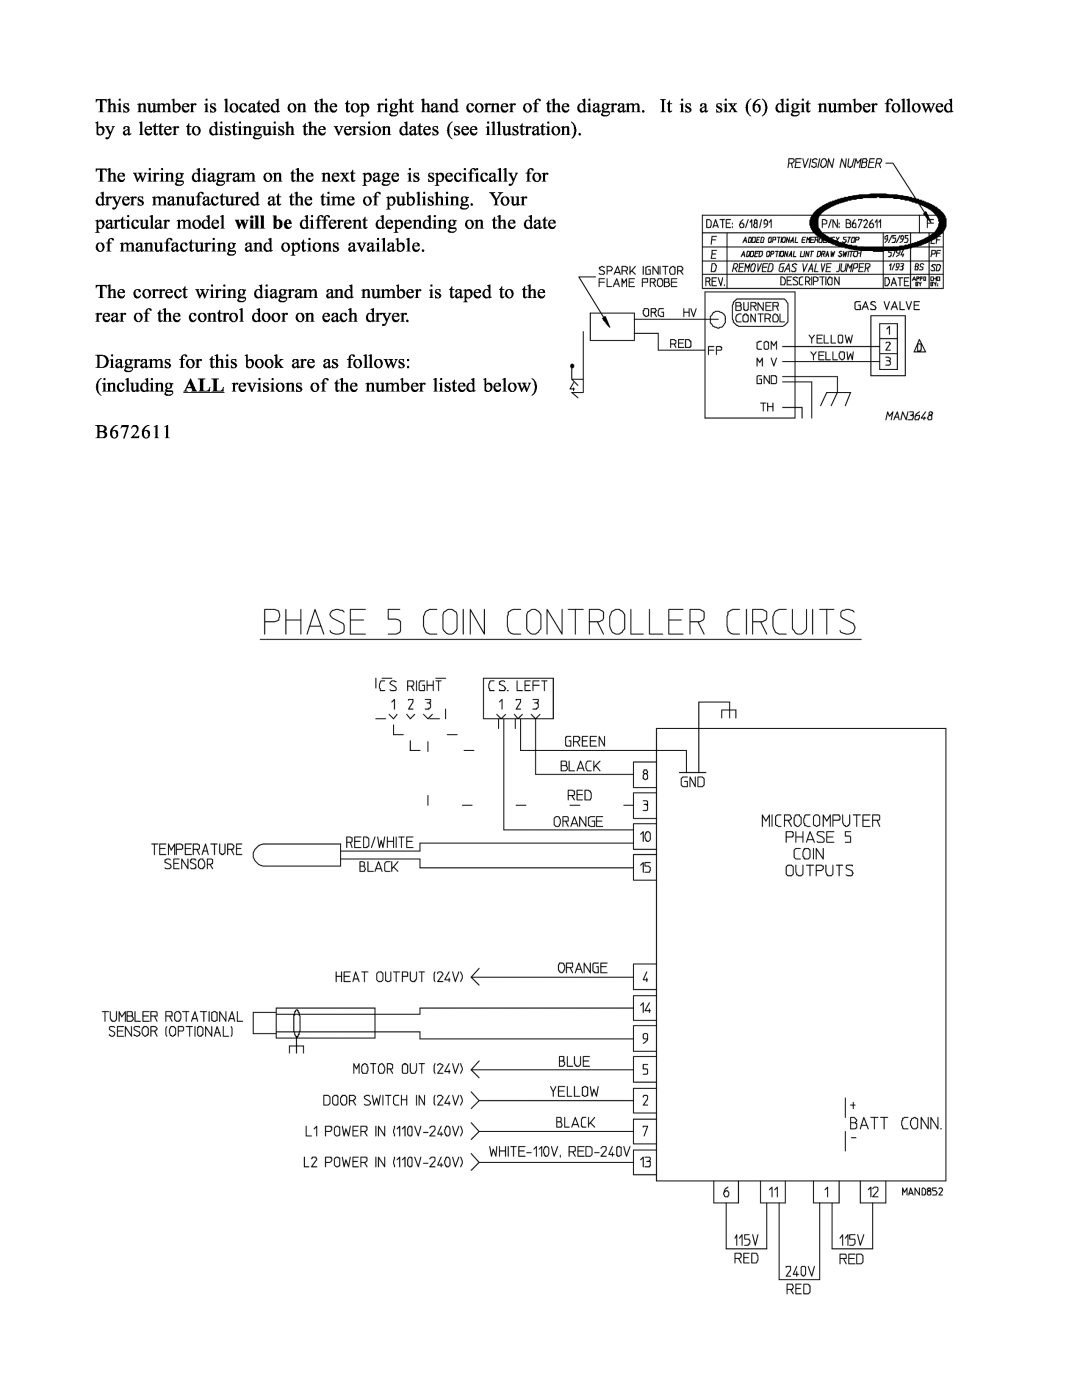 American Dryer Corp WDA-385 service manual Diagrams for this book are as follows 